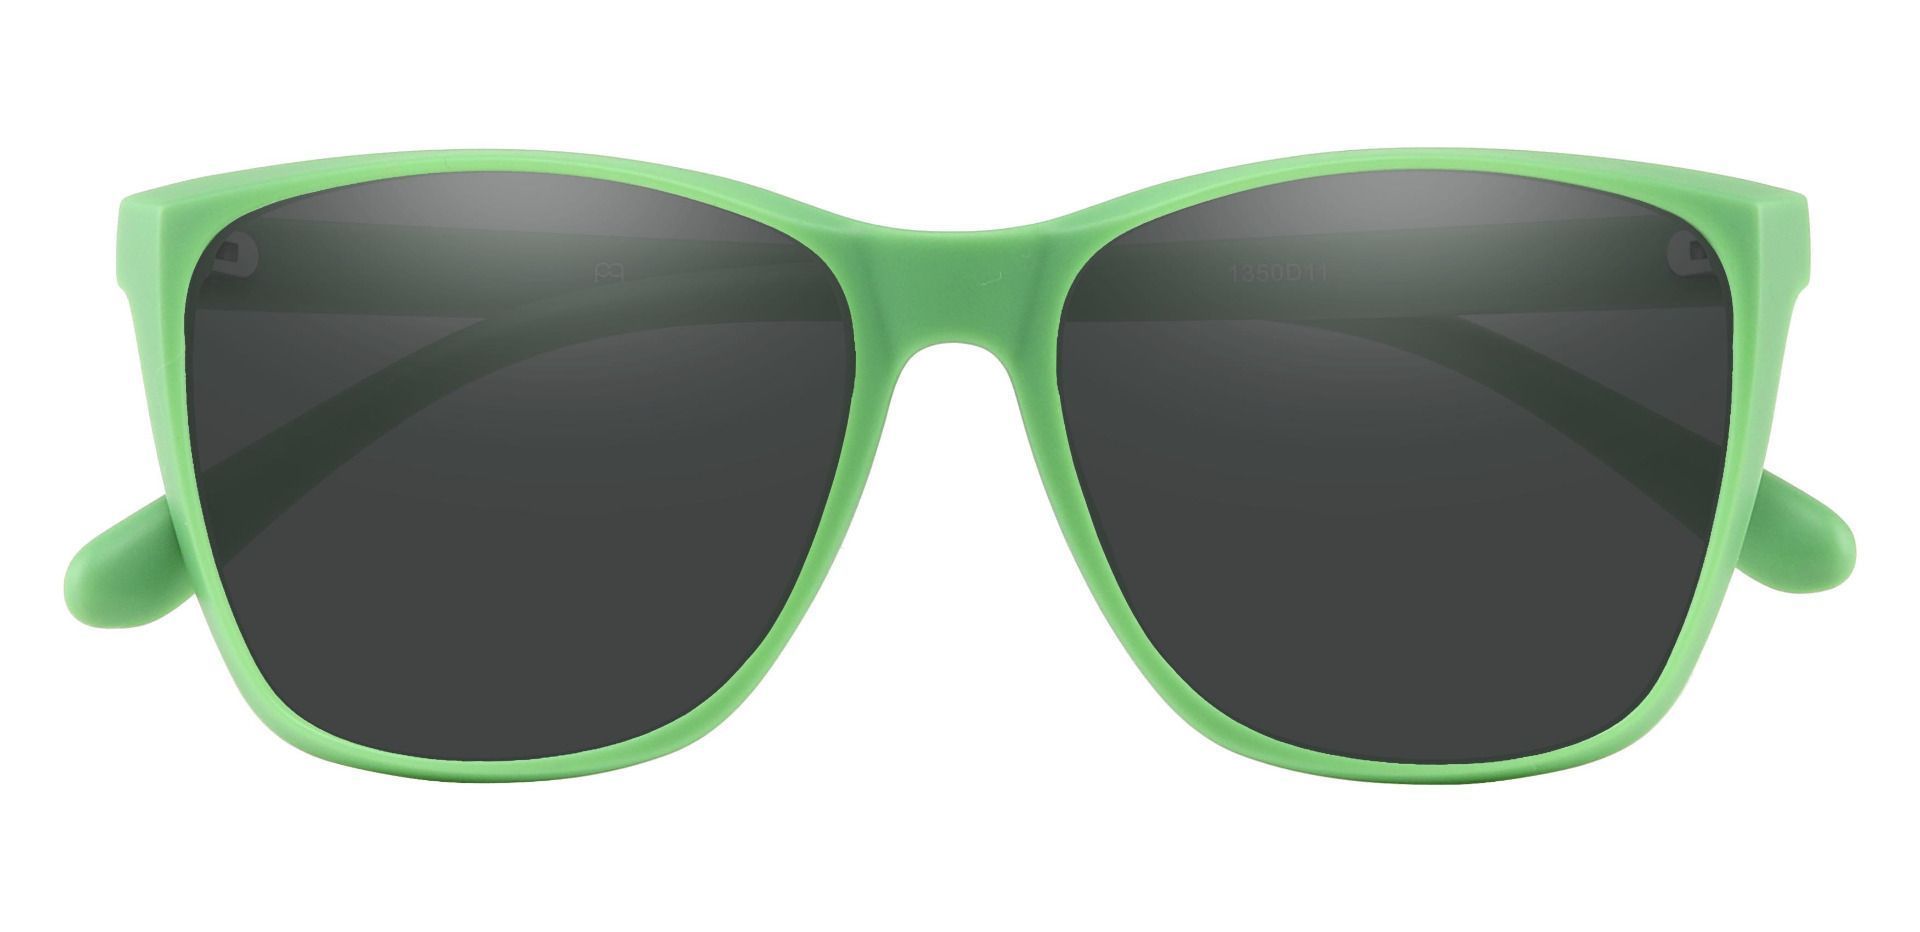 Hickory Square Reading Sunglasses - Green Frame With Gray Lenses